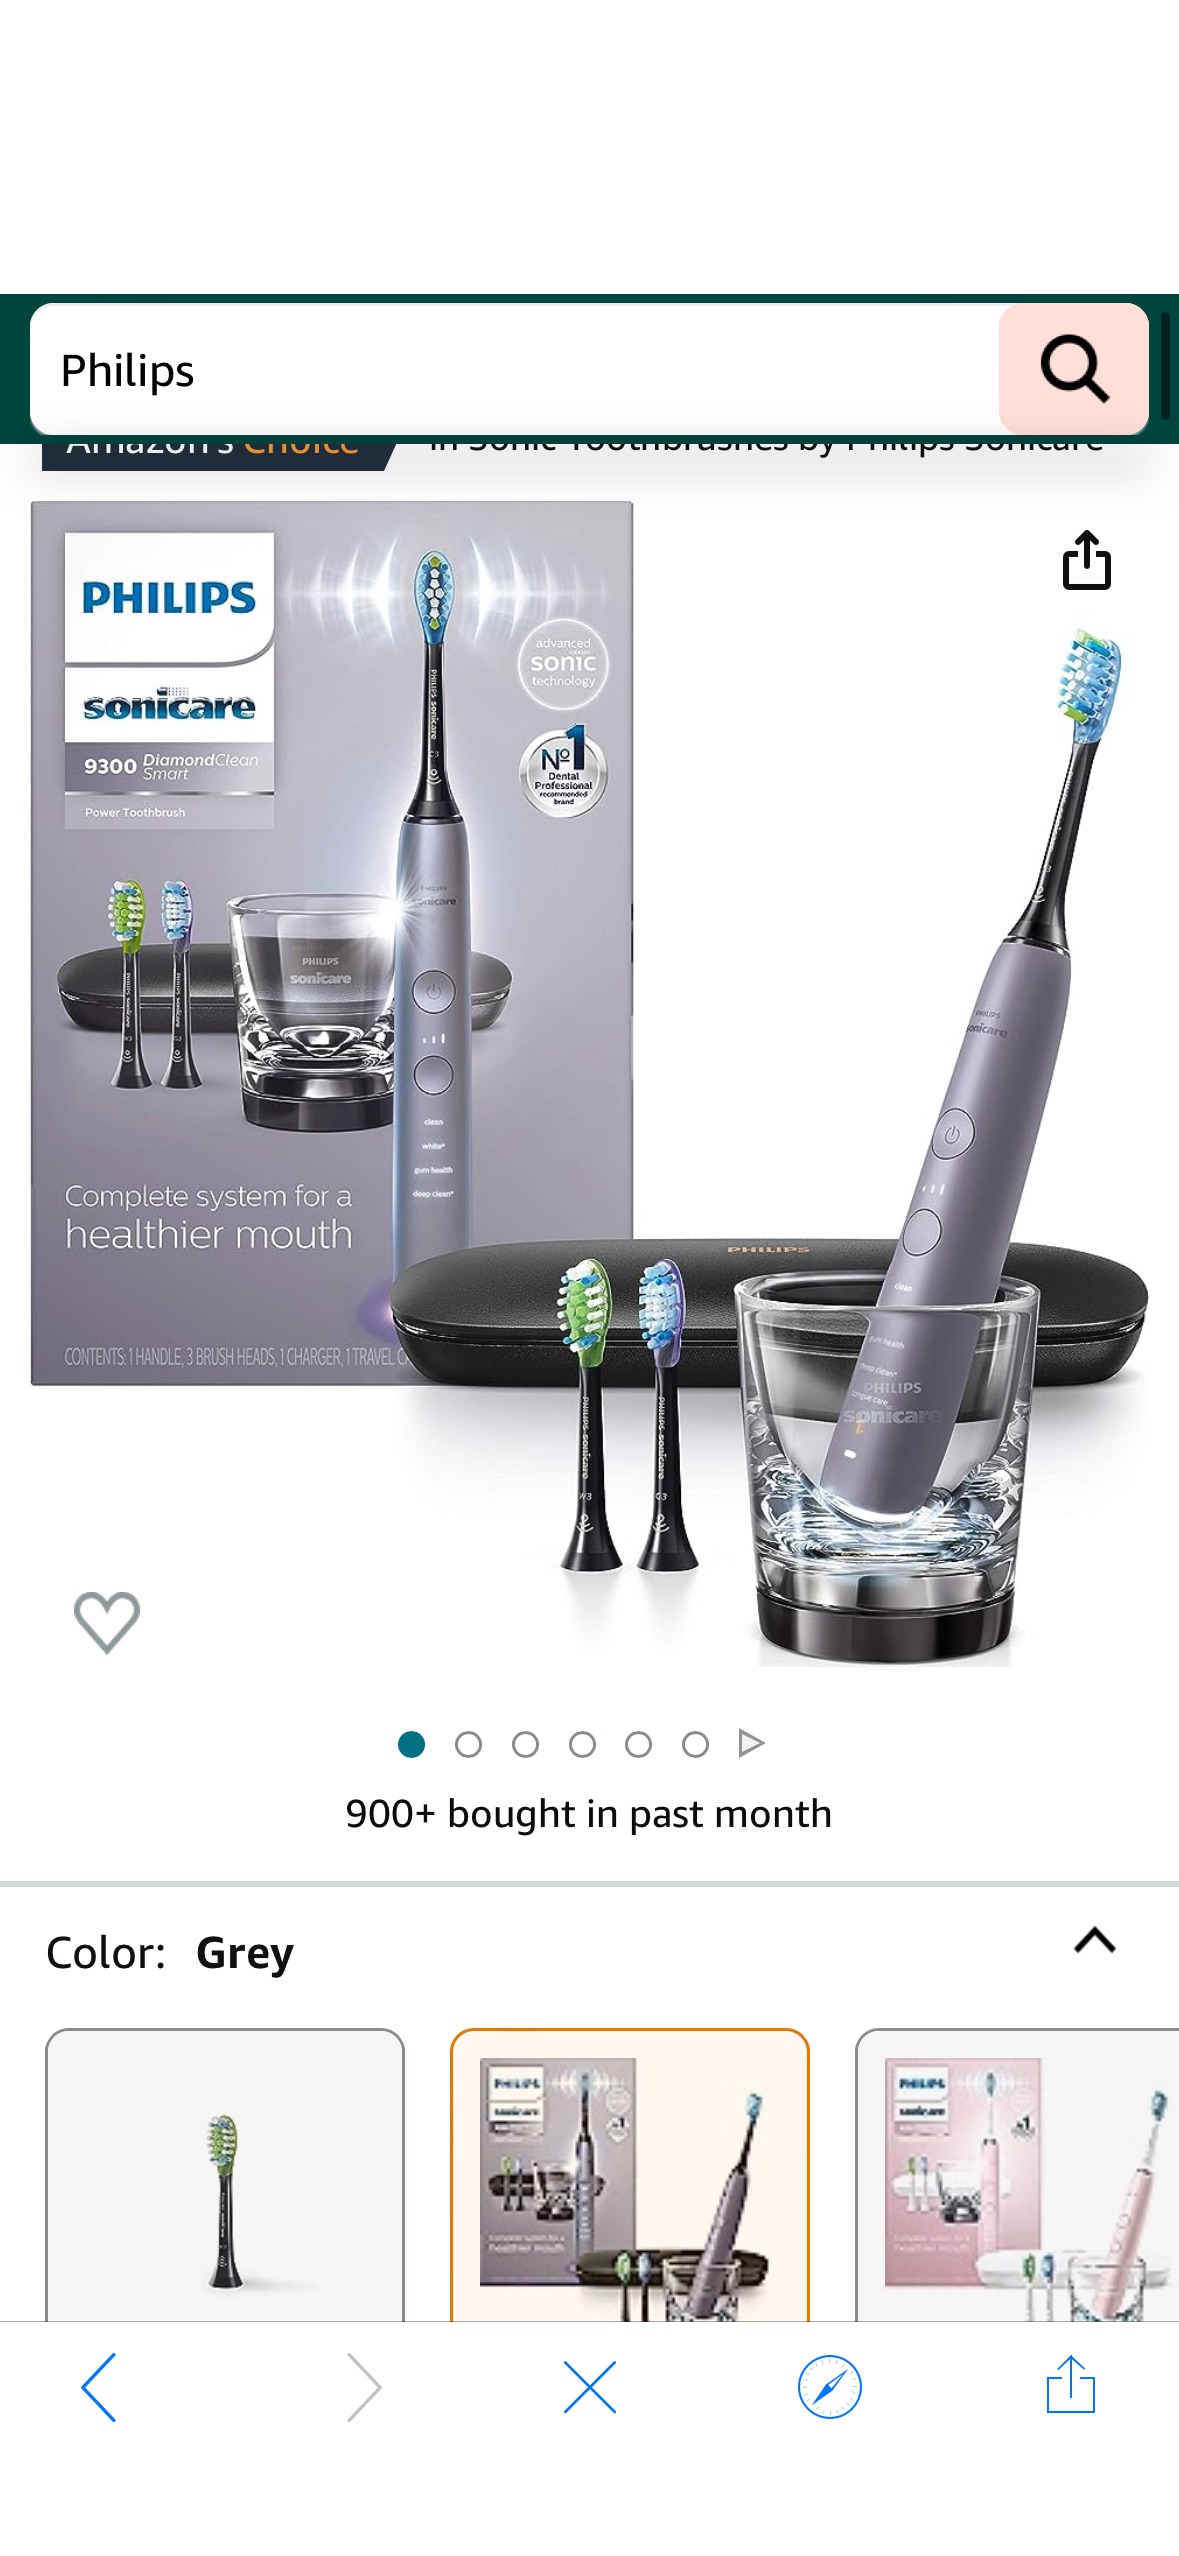 Amazon.com: Philips Sonicare DiamondClean Smart 9300 Rechargeable Electric Power Toothbrush, Grey, HX9903/41 : Health & Household